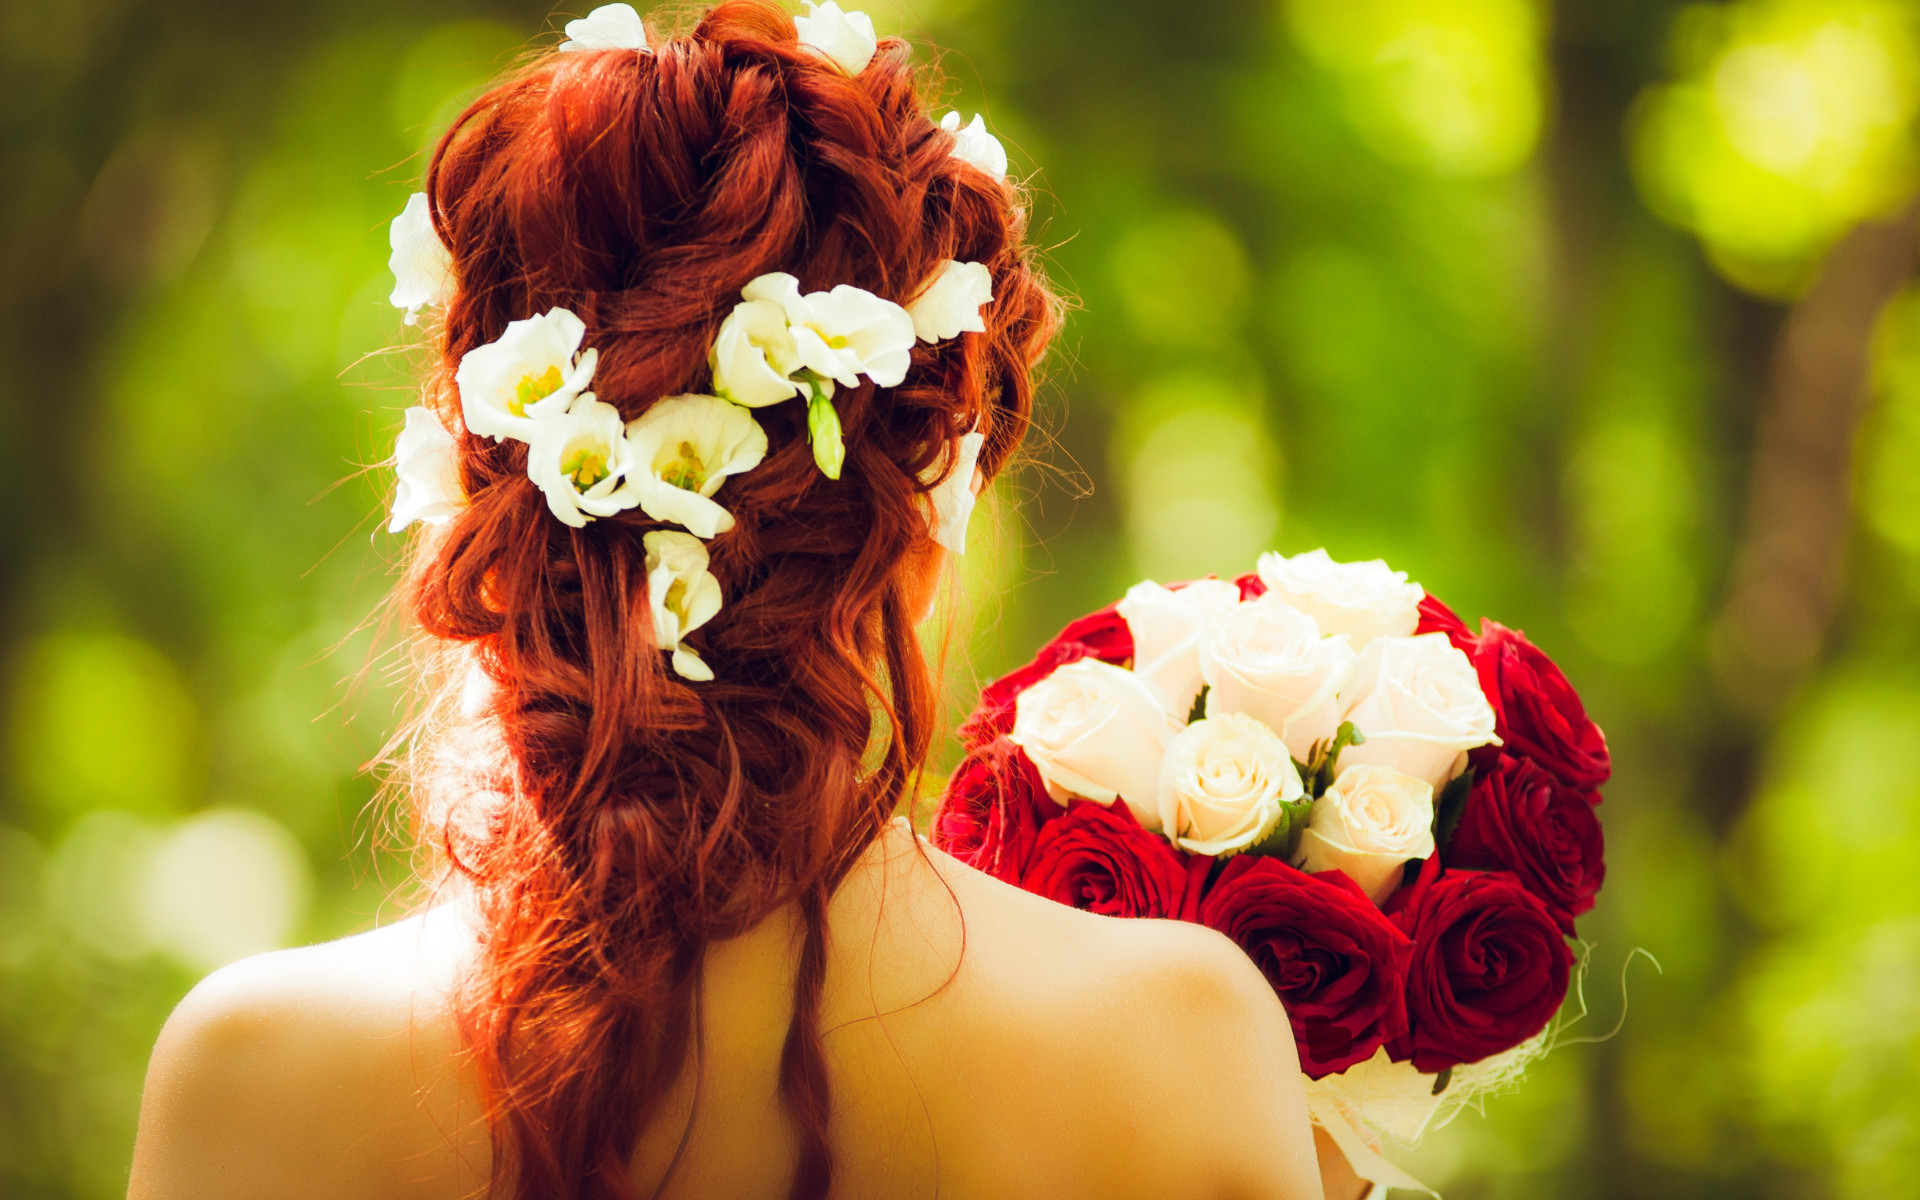 Bride and wedding flowers wallpaper 1920x1200